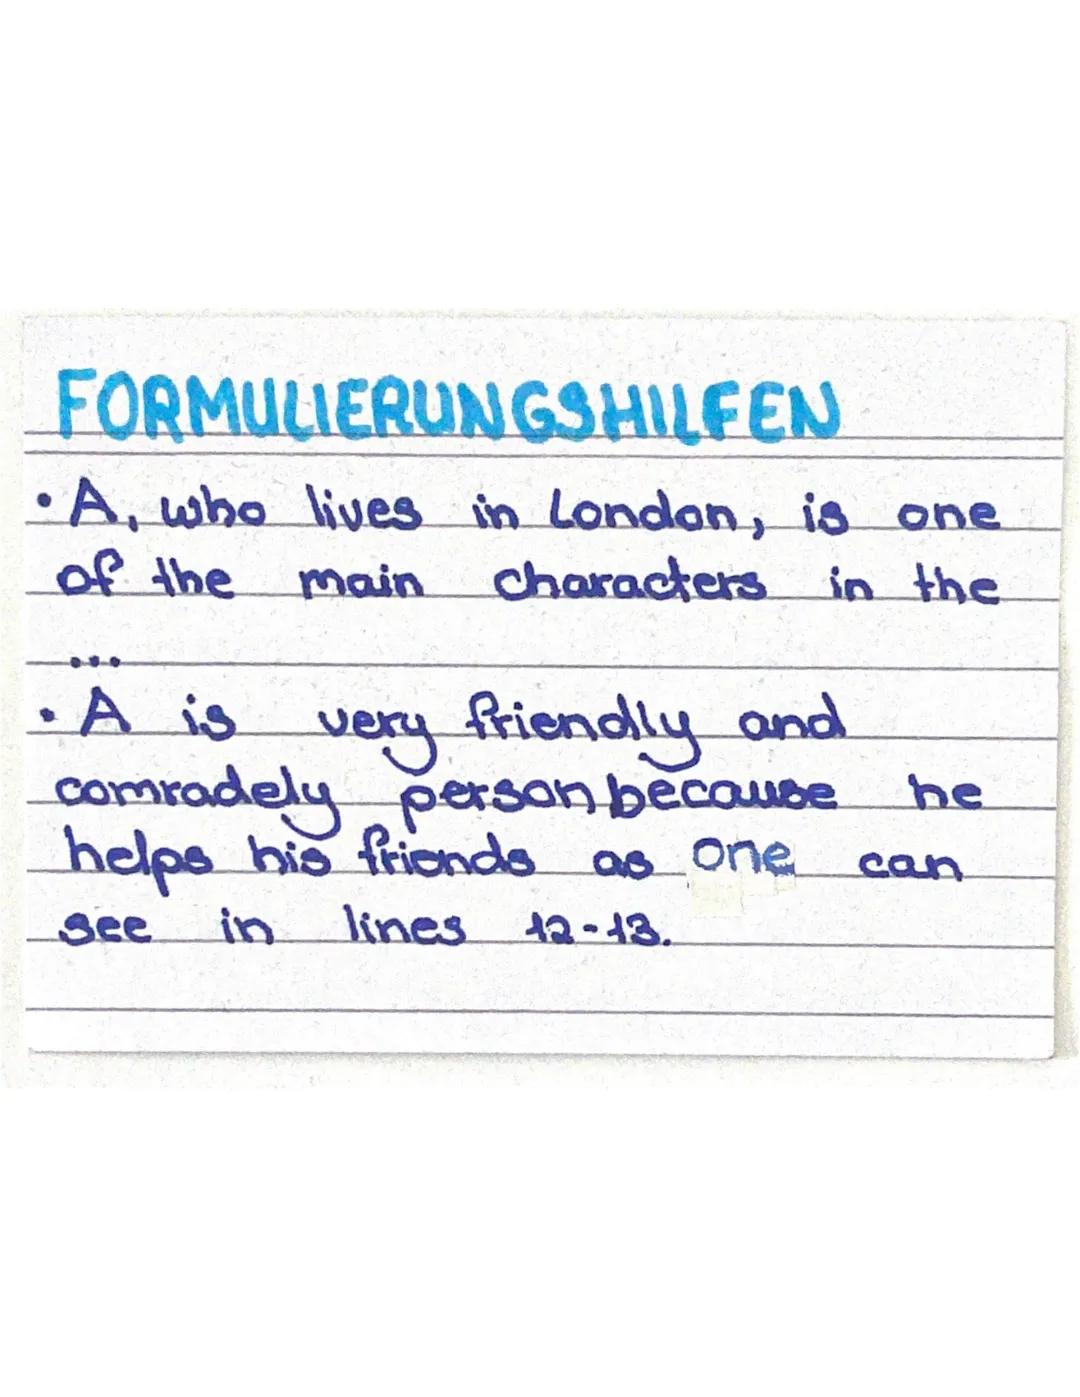 FORMULIERUNGSHILFEN
•A, who lives in London, is one
of the
main
characters in the
1
A is very friendly and
comradely person because he
helps